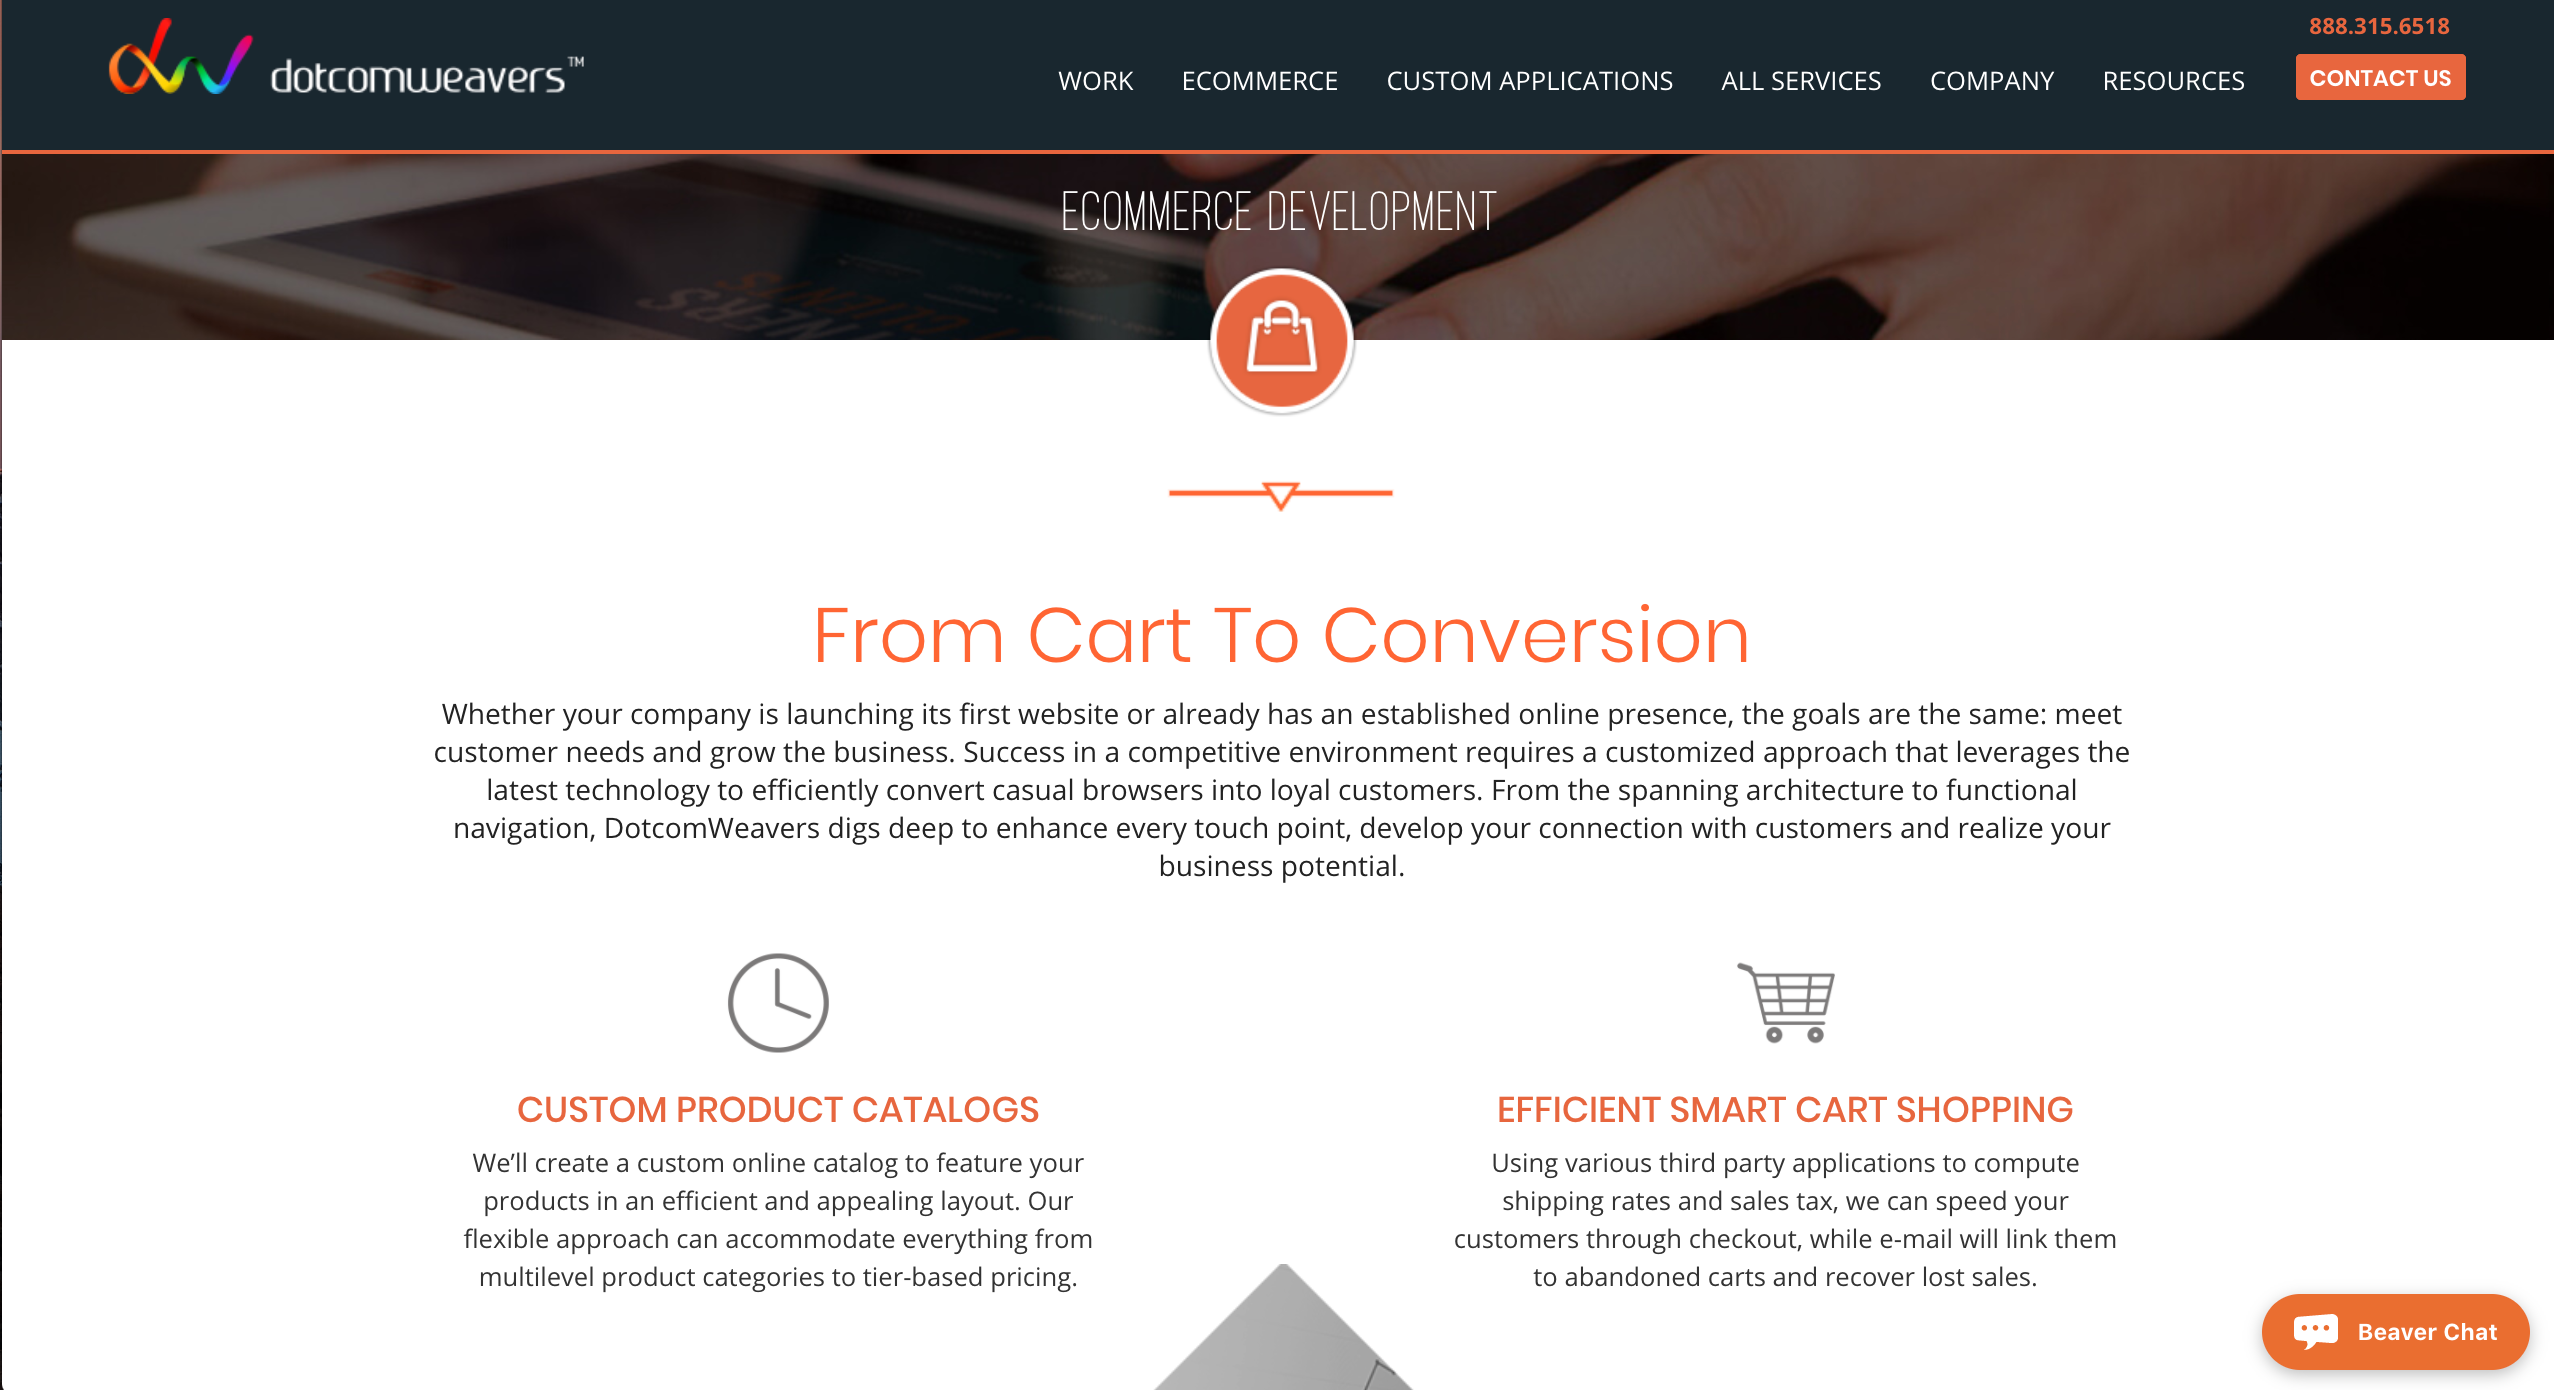 Services page of #3 Top eCommerce Website Design Business: Dotcomweavers